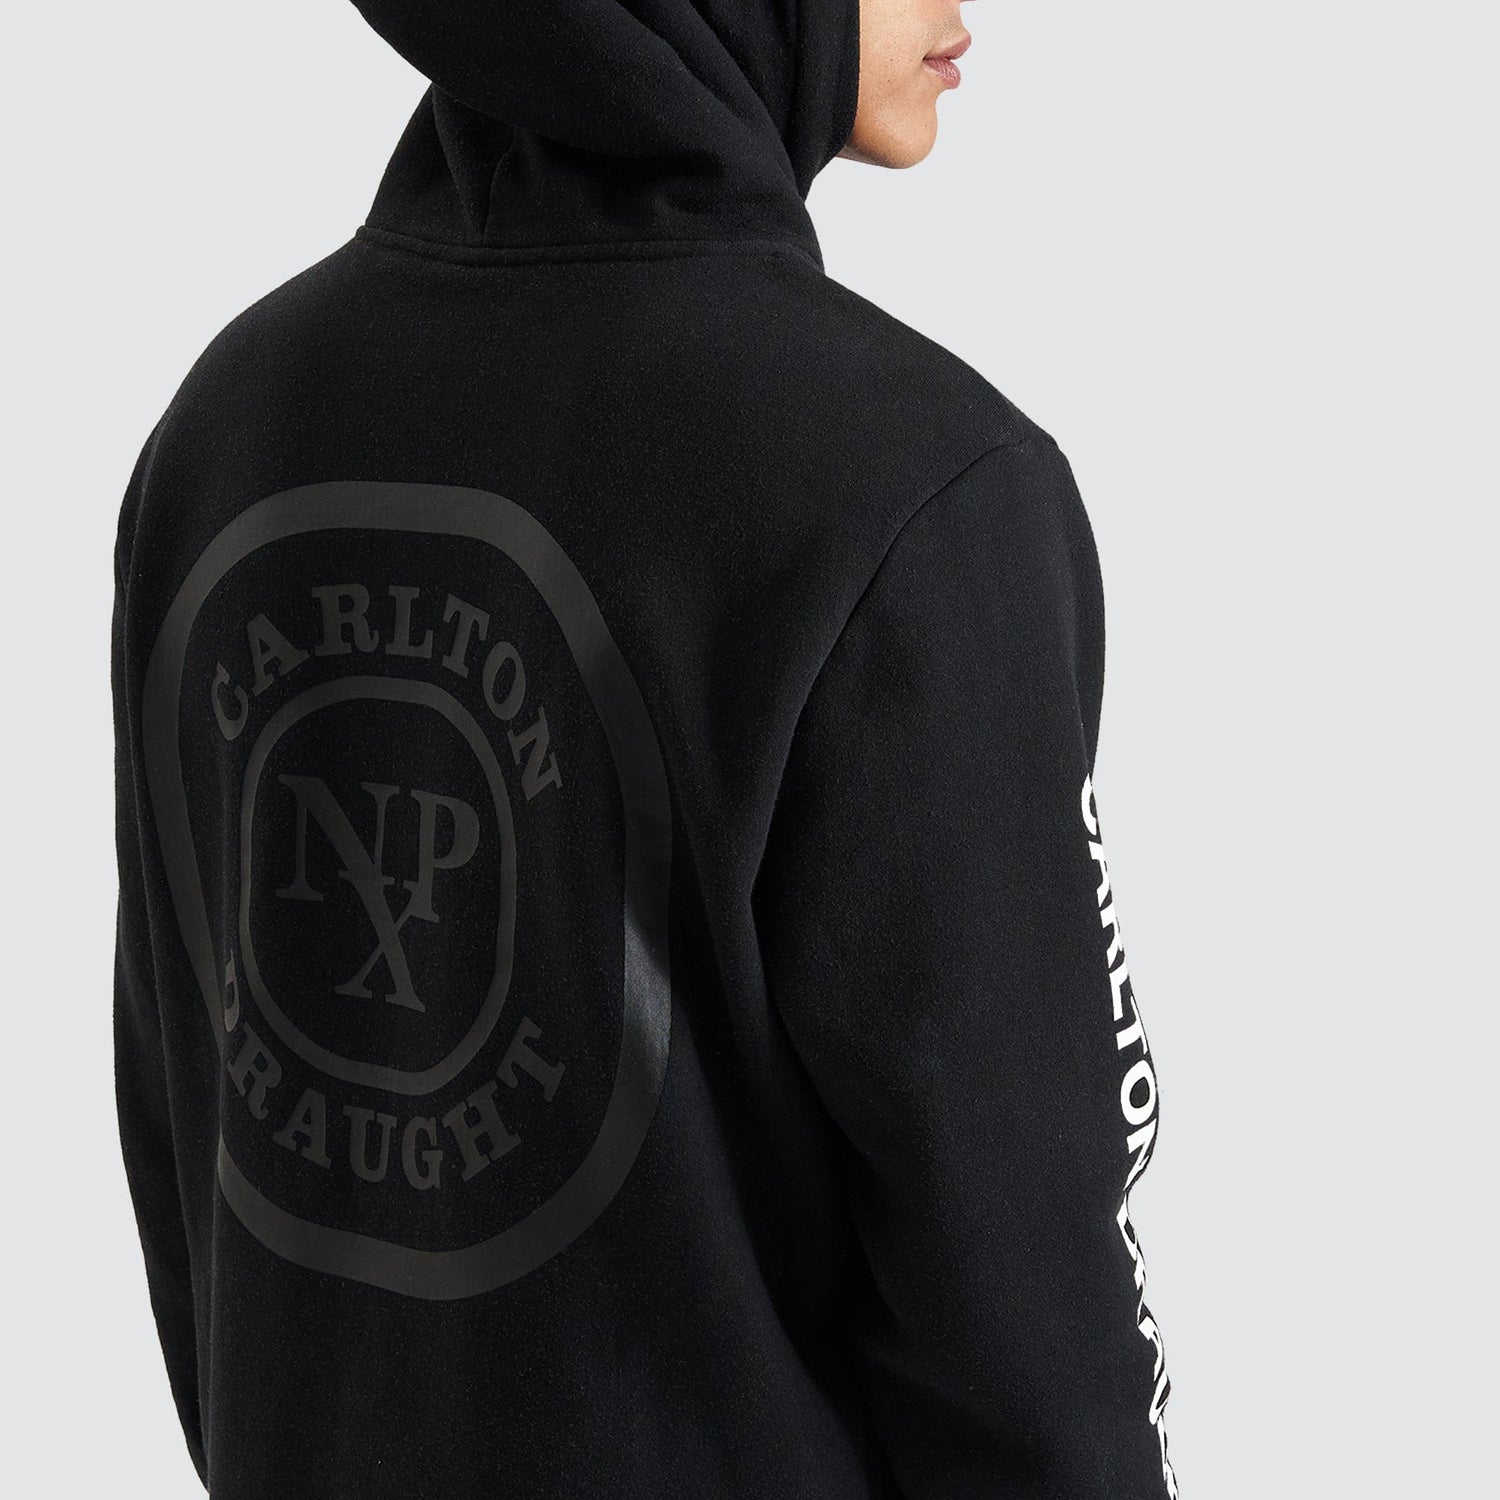 Drummond Dual Curved Hooded Sweater Jet Black